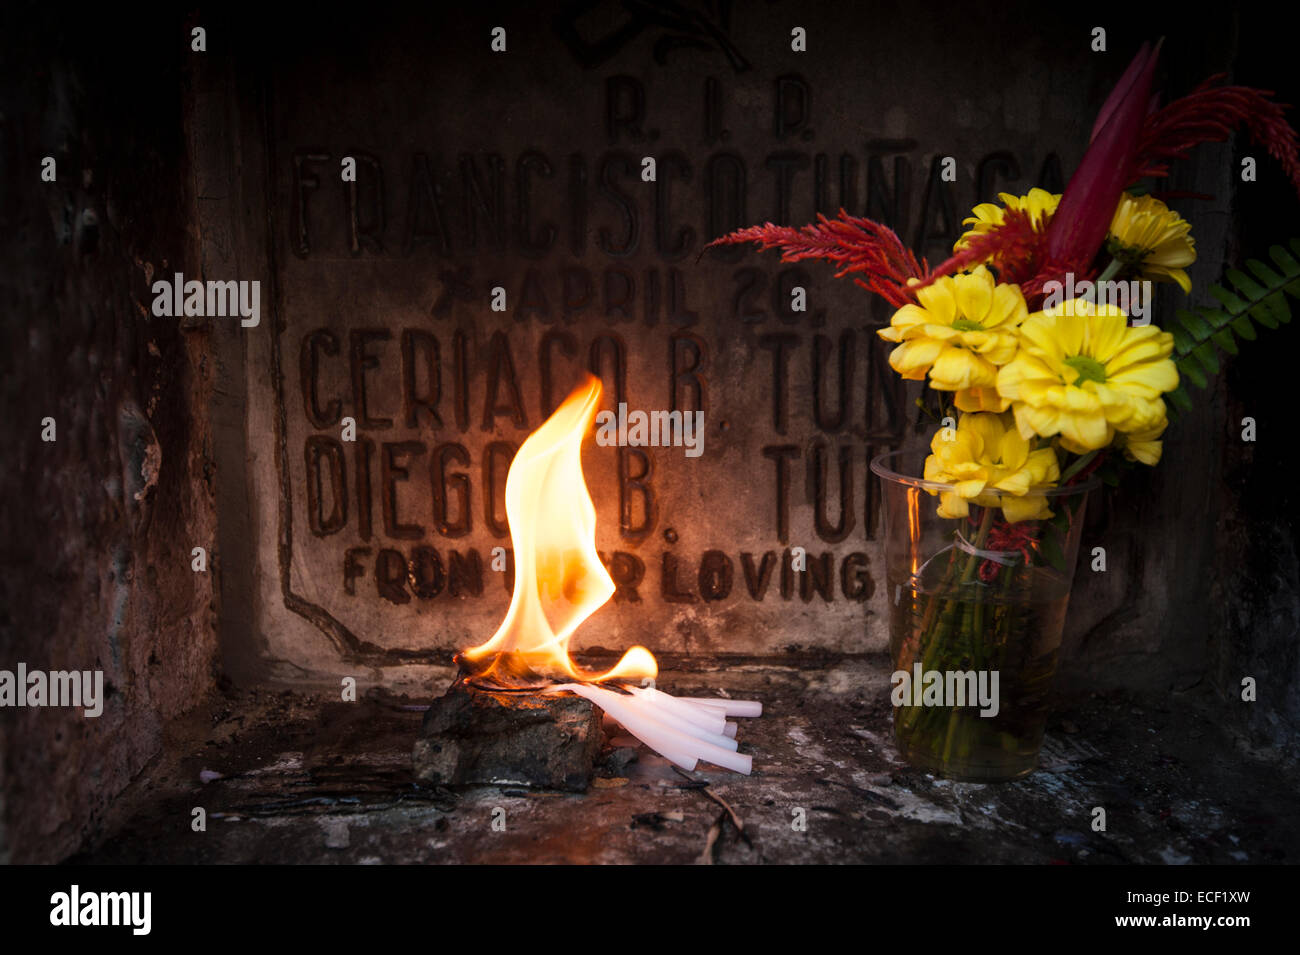 Flame and flowers at a tomb Stock Photo